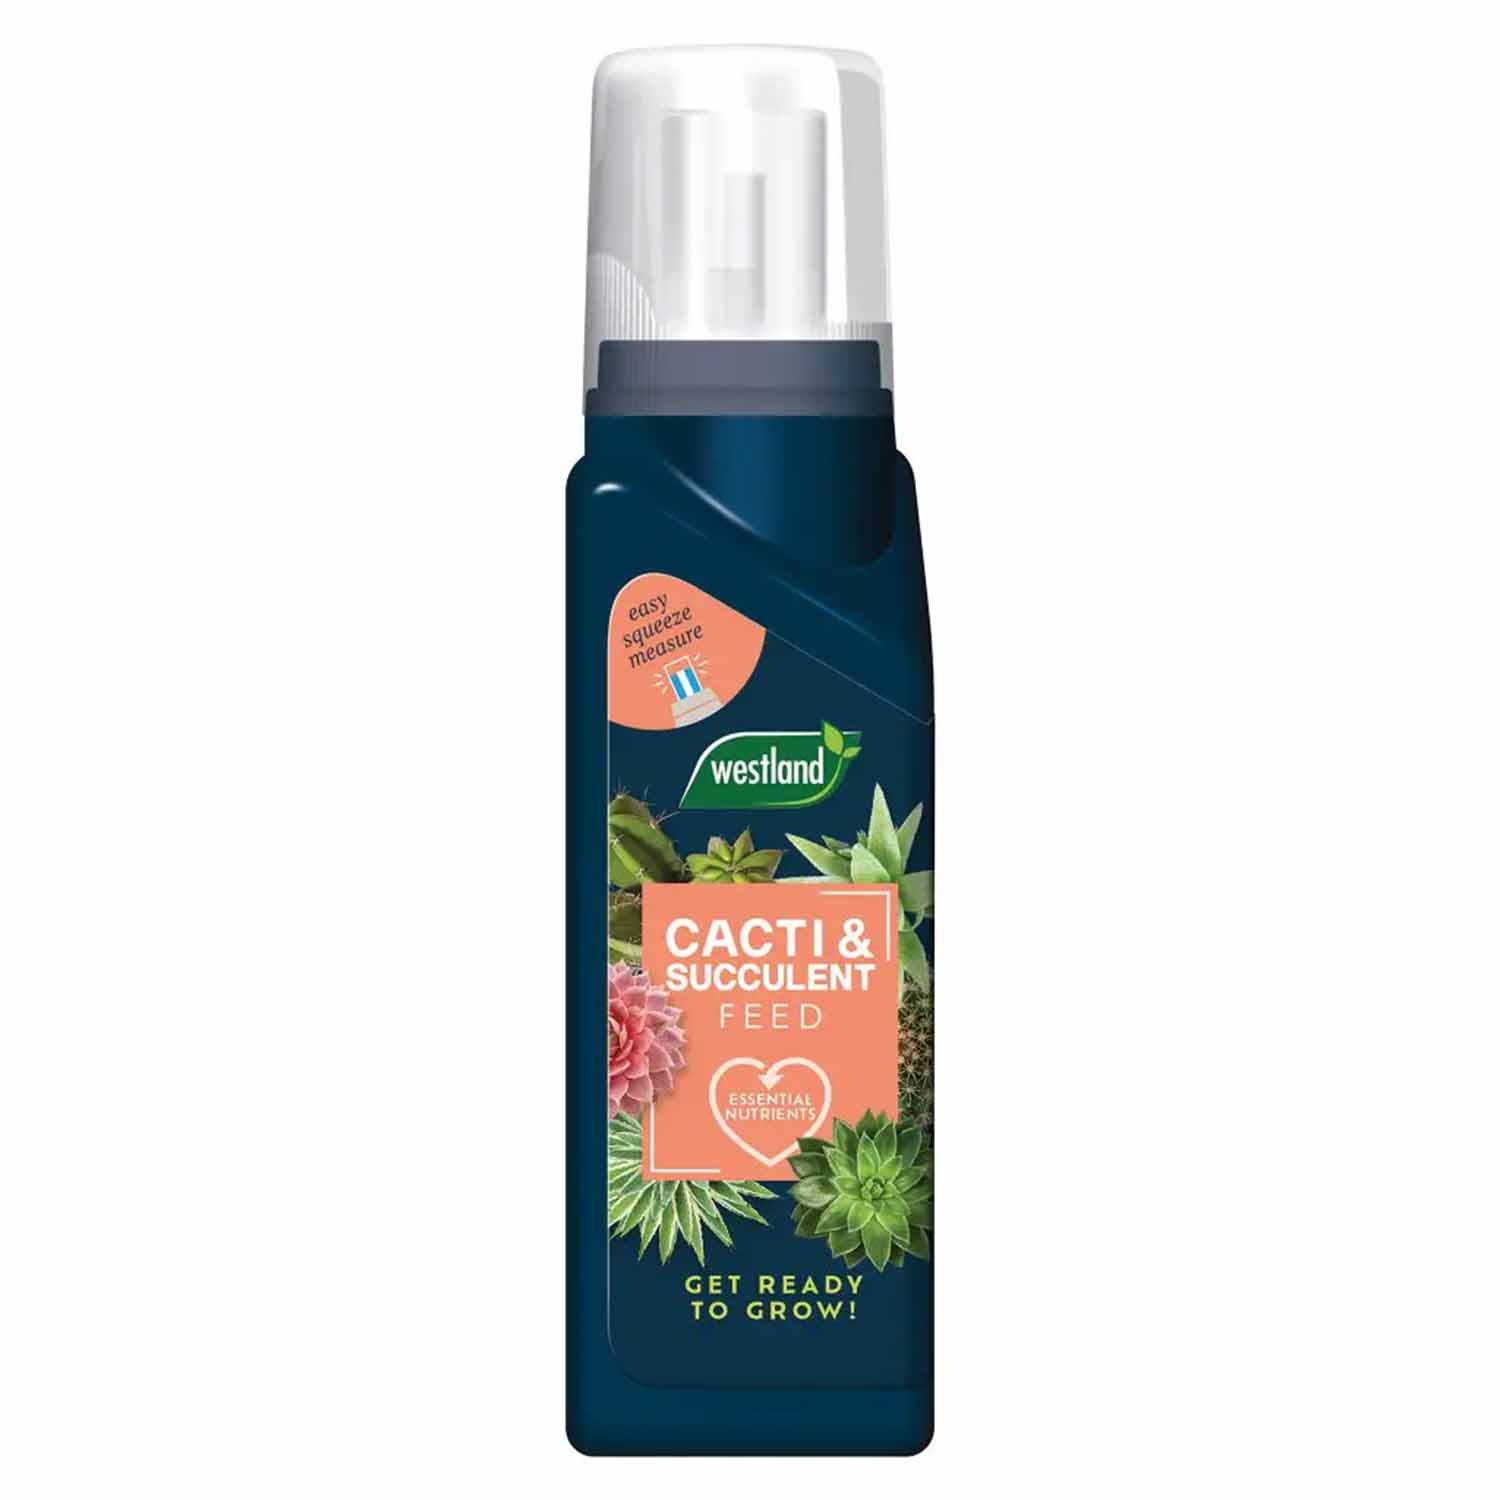 Cacti & Succulent Feed Concentrate